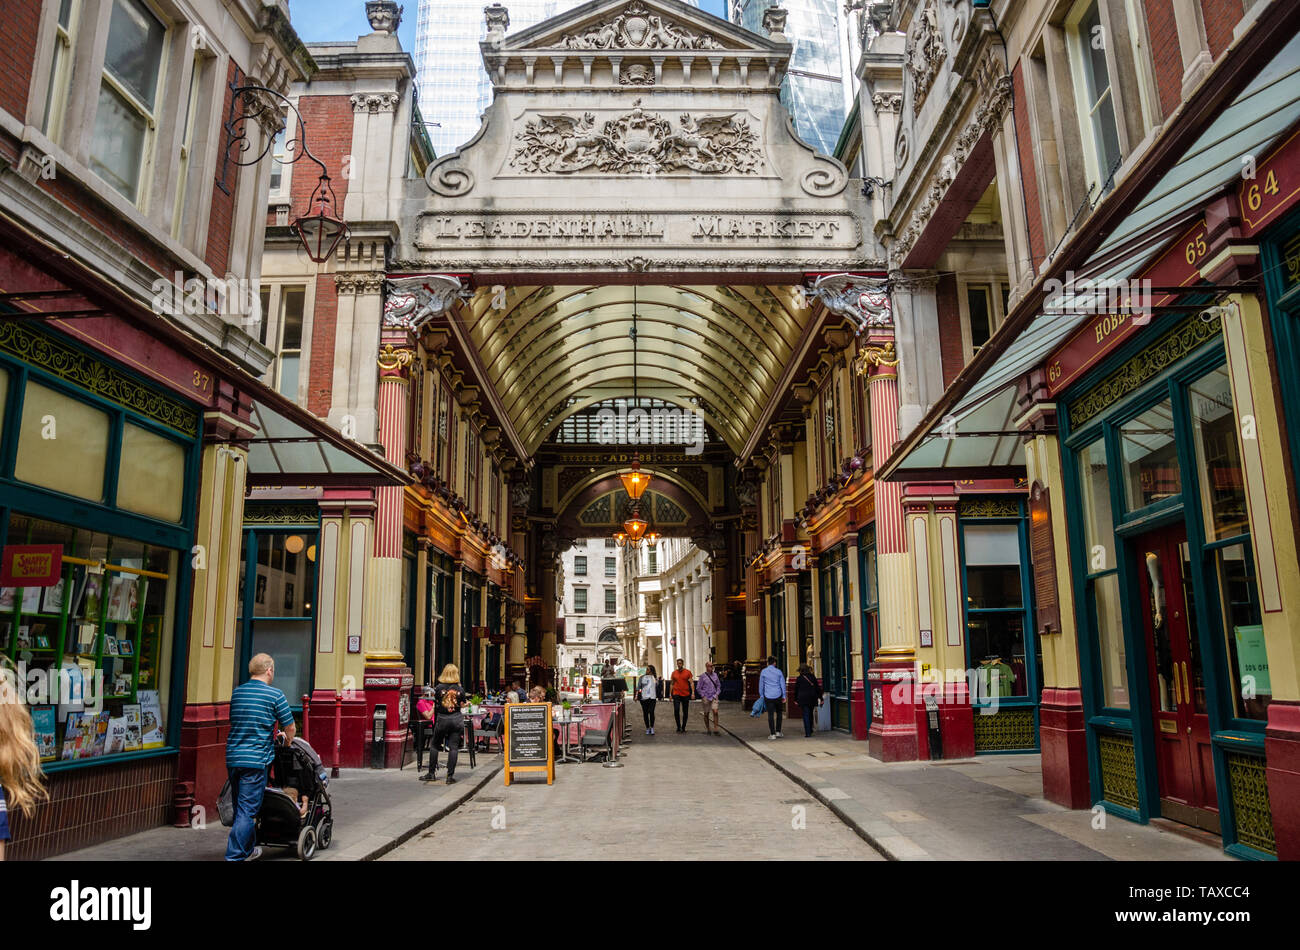 The Leadenhall Market is a 14th Century covered market with vaulted ceilings in the financial district of The City of London. Stock Photo